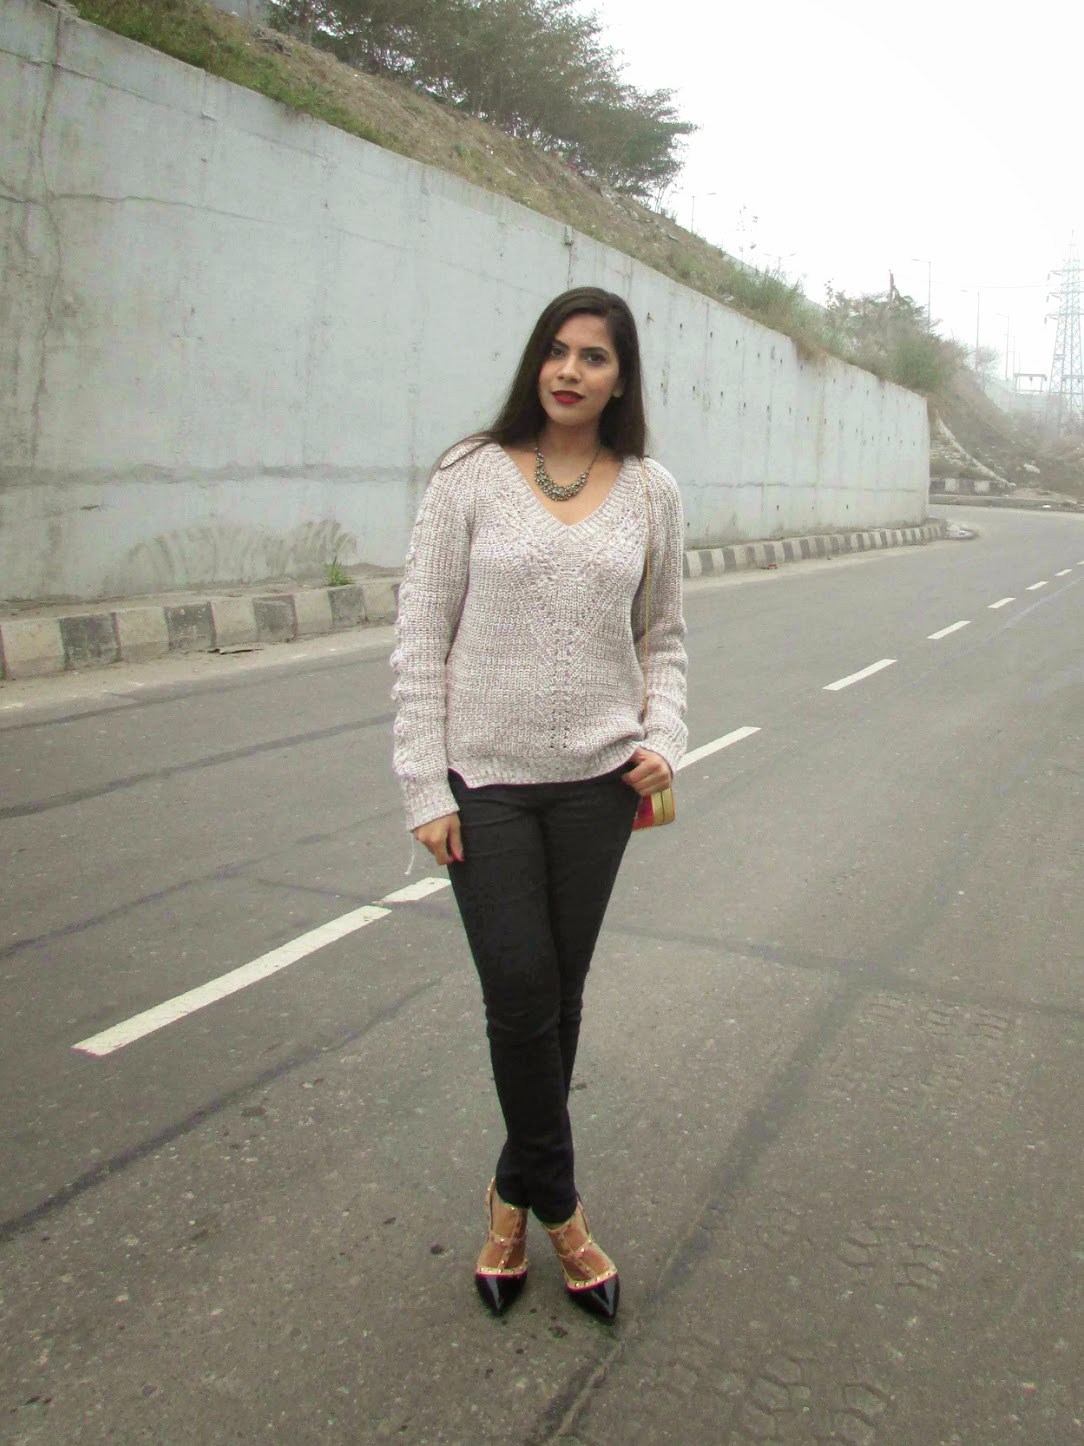 Long Sleeves Zipper Side Slit Knitwear, heavy knit sweater, pullover, warm pullover, winter trends 2015, how to style heavy sweater, india winter trends,peplu, floral , floral peplum , floral peplum top , frock top , peplum top with floral print, peplum floral , sweat heart neck line top , distressed,distressedjeans, distressedboyfriendjeans,boyfrien,boyfriendjeans,boyfriendjeanswithcutout,ripped,rippejeans, fashion , chcnova,ootd,chicnovareview , distressedjeans chicnova,rippedboyfriendjeans,distressedpants,howtostylerippedjeans,howtostyleboyfriendjeans,howtostylebaggyjeans,crochet , lace , summer, white , crochet top , lace top , white lace top , white crochet top , net , net top , white net top,Statement necklace, necklace, statement necklaces, big necklace, heavy necklaces , gold necklace, silver necklace, silver statement necklace, gold statement necklace, studded statement necklace , studded necklace, stone studded necklace, stone necklace, stove studded statement necklace, stone statement necklace, stone studded gold statement necklace, stone studded silver statement necklace, black stone necklace, black stone studded statement necklace, black stone necklace, black stone statement necklace, neon statement necklace, neon stone statement necklace, black and silver necklace, black and gold necklace, blank and silver statement necklace, black and gold statement necklace, silver jewellery, gold jewellery, stove jewellery, stone studded jewellery, imitation jewellery, artificial jewellery, junk jewellery, cheap jewellery ,chicnova Statement necklace, chicnova necklace, chicnova statement necklaces,chicnova big necklace, chicnova  heavy necklaces , chicnova gold necklace, chicnova silver necklace,  chicnova  statement necklace,chicnova  gold statement necklace,chicnova studded statement necklace , chicnova studded necklace, chicnova stone studded necklace, chicnova stone necklace, chicnova stove studded statement necklace, chicnova stone statement necklace, chicnova stone studded gold statement necklace, chicnova stone studded silver statement necklace, chicnova black stone necklace, chicnova black stone studded statement necklace, chicnova black stone necklace, chicnova black stone statement necklace, chicnova neon statement necklace, chicnova neon stone statement necklace, chicnova  black and silver necklace, chicnova black and gold necklace, chicnova black  and silver statement necklace, chicnova black and gold statement necklace, silver jewellery, chicnova gold jewellery, chicnova stove jewellery, chicnova stone studded jewellery, chicnova imitation jewellery, chicnova artificial jewellery, chicnova junk jewellery, chicnova cheap jewellery ,Cheap Statement necklace, Cheap necklace, Cheap statement necklaces,Cheap big necklace, Cheap heavy necklaces , Cheap gold necklace, Cheap silver necklace, Cheap silver statement necklace,Cheap gold statement necklace, Cheap studded statement necklace , Cheap studded necklace, Cheap stone studded necklace, Cheap stone necklace, Cheap stove studded statement necklace, Cheap stone statement necklace, Cheap stone studded gold statement necklace, Cheap stone studded silver statement necklace, Cheap black stone necklace, Cheap black stone studded statement necklace, Cheap black stone necklace, Cheap black stone statement necklace, Cheap neon statement necklace, Cheap neon stone statement necklace, Cheap black and silver necklace, Cheap black and gold necklace, Cheap black  and silver statement necklace, Cheap black and gold statement necklace, silver jewellery, Cheap gold jewellery, Cheap stove jewellery, Cheap stone studded jewellery, Cheap imitation jewellery, Cheap artificial jewellery, Cheap junk jewellery, Cheap cheap jewellery , Black pullover, black and grey pullover, black and white pullover, back cutout, back cutout pullover, back cutout sweater, back cutout jacket, back cutout top, back cutout tee, back cutout tee shirt, back cutout shirt, back cutout dress, back cutout trend, back cutout summer dress, back cutout spring dress, back cutout winter dress, High low pullover, High low sweater, High low jacket, High low top, High low tee, High low tee shirt, High low shirt, High low dress, High low trend, High low summer dress, High low spring dress, High low winter dress,chicnova Black pullover, chicnova black and grey pullover, chicnova black and white pullover, chicnova back cutout, chicnova back cutout pullover, chicnova back cutout sweater, chicnova  back cutout jacket, chicnova back cutout top, chicnova back cutout tee, chicnova back cutout tee shirt, chicnova back cutout shirt, chicnova back cutout dress, chicnova back cutout trend, chicnova back cutout summer dress, chicnova back cutout spring dress, chicnova back cutout winter dress, chicnova High low pullover, chicnova High low sweater, chicnova High low jacket, chicnova High low top, chicnova High low tee, ocrun High low tee shirt, chicnova High low shirt, chicnova High low dress, chicnova High low trend, chicnova High low summer dress, chicnova High low spring dress, chicnova High low winter dress, Cropped, cropped tee,cropped tee shirt , cropped shirt, cropped sweater, cropped pullover, cropped cardigan, cropped top, cropped tank top, Cheap Cropped, cheap cropped tee,cheap cropped tee shirt ,cheap  cropped shirt, cheap cropped sweater, cheap cropped pullover, cheap cropped cardigan,cheap  cropped top, cheap cropped tank top,banggood Cropped, chicnova cropped tee, chicnova cropped tee shirt , chicnova cropped shirt, chicnova cropped sweater, chicnova cropped pullover, chicnova cropped cardigan, chicnova cropped top, chicnova cropped  top, Winter Cropped, winter cropped tee, winter cropped tee shirt , winter cropped shirt, winter cropped sweater, winter cropped pullover, winter cropped cardigan, winter cropped top, winter cropped tank top,Leggings, winter leggings, warm leggings, winter warm leggings, fall leggings, fall warm leggings, tights, warm tights, winter tights, winter warm tights, fall tights, fall warm tights,chicnova leggings, chicnova tights, warm warm leggings, chicnova warm tights, chicnova winter warm tights, chicnova fall warm tights, woollen tights , woollen leggings, shopclues woollen tights, chicnova woollen leggings, woollen bottoms, chicnova woollen bottoms, chicnova woollen pants , woollen pants,  Christmas , Christmas leggings, Christmas tights, shopclues Christmas, shopclues Christmas clothes, clothes for Christmas , shopclues Christmas leggings, shopclues Christmas tights, shopclues warm Christmas leggings, shopclues warm Christmas  tights, shopclues snowflake leggings, snowflake leggings, snowflake tights, shopclues rain deer tights, shopclues rain deer leggings, ugly Christmas sweater, Christmas tree, Christmas clothes, Santa clause,Wishlist, clothes wishlist, chicnova wishlist, chicnova, chicnova.com, chicnova wishlist, autumn wishlist,chicnova ocrun wishlist, chicnova.com,autumn clothes wishlist, autumn shoes wishlist, autumn bags wishlist, autumn boots wishlist, autumn pullovers wishlist, autumn cardigans wishlist, autymn coats wishlist, chicnova clothes wishlist, chicnova bags wishlist, chicnova bags wishlist, chicnova boots wishlist, chicnova pullover wishlist, chicnovacardigans wishlist, chicnova autum clothes wishlist, winter clothes, wibter clothes wishlist, winter wishlist, wibter pullover wishlist, winter bags wishlist, winter boots wishlist, winter cardigans wishlist, winter leggings wishlist, chicnova winter clothes, chicnovaautumn clothes, chicnova winter collection, chicnova autumn collection,Cheap clothes online,cheap dresses online, cheap jumpsuites online, cheap leggings online, cheap shoes online, cheap wedges online , cheap skirts online, cheap jewellery online, cheap jackets online, cheap jeans online, cheap maxi online, cheap makeup online, cheap cardigans online, cheap accessories online, cheap coats online,cheap brushes online,cheap tops online, chines clothes online, Chinese clothes,Chinese jewellery ,Chinese jewellery online,Chinese heels online,Chinese electronics online,Chinese garments,Chinese garments online,Chinese products,Chinese products online,Chinese accessories online,Chinese inline clothing shop,Chinese online shop,Chinese online shoes shop,Chinese online jewellery shop,Chinese cheap clothes online,Chinese  clothes shop online, korean online shop,korean garments,korean makeup,korean makeup shop,korean makeup online,korean online clothes,korean online shop,korean clothes shop online,korean dresses online,korean dresses online,cheap Chinese clothes,cheap korean clothes,cheap Chinese makeup,cheap korean makeup,cheap korean shopping ,cheap Chinese shopping,cheap Chinese online shopping,cheap korean online shopping,cheap Chinese shopping website,cheap korean shopping website, cheap online shopping,online shopping,how to shop online ,how to shop clothes online,how to shop shoes online,how to shop jewellery online,how to shop mens clothes online, mens shopping online,boys shopping online,boys jewellery online,mens online shopping,mens online shopping website,best Chinese shopping website, Chinese online shopping website for men,best online shopping website for women,best korean online shopping,best korean online shopping website,korean fashion,korean fashion for women,korean fashion for men,korean fashion for girls,korean fashion for boys,best chinese online shopping,best chinese shopping website,best chinese online shopping website,wholesale chinese shopping website,wholesale shopping website,chinese wholesale shopping online,chinese wholesale shopping, chinese online shopping on wholesale prices, clothes on wholesale prices,cholthes on wholesake prices,clothes online on wholesales prices,online shopping, online clothes shopping, online jewelry shopping,how to shop online, how to shop clothes online, how to shop earrings online, how to shop,skirts online, dresses online,jeans online, shorts online, tops online, blouses online,shop tops online, shop blouses online, shop skirts online, shop dresses online, shop botoms online, shop summer dresses online, shop bracelets online, shop earrings online, shop necklace online, shop rings online, shop highy low skirts online, shop sexy dresses onle, men's clothes online, men's shirts online,men's jeans online, mens.s jackets online, mens sweaters online, mens clothes, winter coats online, sweaters online, cardigens online,beauty , fashion,beauty and fashion,beauty blog, fashion blog , indian beauty blog,indian fashion blog, beauty and fashion blog, indian beauty and fashion blog, indian bloggers, indian beauty bloggers, indian fashion bloggers,indian bloggers online, top 10 indian bloggers, top indian bloggers,top 10 fashion bloggers, indian bloggers on blogspot,home remedies, how to,chicnova online shopping,chicnova online shopping review,chicnova.com review,banggood online clothing store,chicnova online chinese store,chicnova online shopping,chicnova  site review,chicnova.com site review, chicnova Chines fashion, chicnova , chicnova.com, chicnova clothing, chicnova dresses, chicnovashoes, chicnova accessories,chicnova men cloths ,chicnovamakeup, chicnova helth products,chicnova Chinese online shopping, chicnova Chinese store, chicnova online chinese shopping, chicnova lchinese shopping online,chicnova, chicnova dresses, chicnova clothes, chicnova garments, chicnova clothes, chicnova skirts, chicnova pants, chicnova tops, chicnova cardigans, chicnova leggings, chicnova fashion , chicnova clothes fashion, banggood footwear, chicnova footwear, chicnova jewellery, ocrun fashion jewellery, chicnova rings, ocrun necklace, chicnova bracelets, chicnova earings,Autumn, fashion, banggood, wishlist,Winter,fall, fall abd winter, winter clothes , fall clothes, fall and winter clothes, fall jacket, winter jacket, fall and winter jacket, fall blazer, winter blazer, fall and winter blazer, fall coat , winter coat, falland winter coat, fall coverup, winter coverup, fall and winter coverup, outerwear, coat , jacket, blazer, fall outerwear, winter outerwear, fall and winter outerwear, woolen clothes, wollen coat, woolen blazer, woolen jacket, woolen outerwear, warm outerwear, warm jacket, warm coat, warm blazer, warm sweater, coat , white coat, white blazer, white coat, white woolen blazer, white coverup, white woolens, chicnova online shopping review,chicnova.com review,chicnova online clothing store,chicnova online chinese store,chicnova a online shopping,chicnova site review, chicnova.com site review, chicnova Chines fashion, chicnova , chicnova.com, chicnova clothing, chicnova dresses, chicnova shoes, chicnova accessories,chicnova men cloths ,chicnova makeup, ocrun helth products,chicnova chinese online shopping, chicnova Chinese store, chicnova online chinese shopping, chicnova chinese shopping online,chicnova, ocrun dresses, chicnova clothes, ocrun garments, chicnova clothes, chicnova skirts, chicnova pants, chicnova tops, chicnova cardigans, chicnova leggings, chicnova fashion , chicnova clothes fashion, banggood footwear, chicnovaa fashion footwear, chicnova jewellery, chicnova fashion jewellery, chicnova rings, chicnova necklace, ocrun bracelets, chicnova earings,latest fashion trends online, online shopping, online shopping in india, online shopping in india from america, best online shopping store , best fashion clothing store, best online fashion clothing store, best online jewellery store, best online footwear store, best online store, beat online store for clothes, best online store for footwear, best online store for jewellery, best online store for dresses, worldwide shipping free, free shipping worldwide, online store with free shipping worldwide,best online store with worldwide shipping free,low shipping cost, low shipping cost for shipping to india, low shipping cost for shipping to asia, low shipping cost for shipping to korea,Friendship day , friendship's day, happy friendship's day, friendship day outfit, friendship's day outfit, how to wear floral shorts, floral shorts, styling floral shorts, how to style floral shorts, how to wear shorts, how to style shorts, how to style style denim shorts, how to wear denim shorts,how to wear printed shorts, how to style printed shorts, printed shorts, denim shorts, how to style black shorts, how to wear black shorts, how to wear black shorts with black T-shirts, how to wear black T-shirt, how to style a black T-shirt, how to wear a plain black T-shirt, how to style black T-shirt,how to wear shorts and T-shirt, what to wear with floral shorts, what to wear with black floral shorts,how to wear all black outfit, what to wear on friendship day, what to wear on a date, what to wear on a lunch date, what to wear on lunch, what to wear to a friends house, what to wear on a friends get together, what to wear on friends coffee date , what to wear for coffee,beauty,Pink, pink pullover, pink sweater, pink jumpsuit, pink sweatshirt, neon pink, neon pink sweater, neon pink pullover, neon pink jumpsuit , neon pink cardigan, cardigan , pink cardigan, sweater, jumper, jumpsuit, pink jumper, neon pink jumper, pink jacket, neon pink jacket, winter clothes, oversized coat, oversized winter clothes, oversized pink coat, oversized coat, oversized jacket, chicnova pink, chicnova  pink sweater, chicnova pink jacket, chicnova pink cardigan, chicnova pink coat, chicnova pink jumper, chicnova neon pink, chicnova neon pink jacket, chicnova neon pink coat, chicnova neon pink sweater, chicnova neon pink jumper, chicnova neon pink pullover, pink pullover, neon pink pullover,fur,furcoat,furjacket,furblazer,fur pullover,fur cardigan,front open fur coat,front open fur jacket,front open fur blazer,front open fur pullover,front open fur cardigan,real fur, real fur coat,real fur jacket,real fur blazer,real fur pullover,real fur cardigan, soft fur,soft fur coat,soft fur jacket,soft furblazer,soft fur pullover,sof fur cardigan, white fur,white fur coat,white fur jacket,white fur blazer, white fur pullover, white fur cardigan,trench, trench coat, trench coat online, trench coat india, trench coat online India, trench cost price, trench coat price online, trench coat online price, cheap trench coat, cheap trench coat online, cheap trench coat india, cheap trench coat online India, cheap trench coat , Chinese trench coat, Chinese coat, cheap Chinese trench coat, Korean coat, Korean trench coat, British coat, British trench coat, British trench coat online, British trench coat online, New York trench coat, New York trench coat online, cheap new your trench coat, American trench coat, American trench coat online, cheap American trench coat, low price trench coat, low price trench coat online , low price trench coat online india, low price trench coat india, chicnova trench, banggood trench coat, chicnova trench coat online, chicnova trench coat india, chicnova trench coat online India, chicnova trench cost price,chicnova trench coat price online, chicnova trench coat online price, chicnova cheap trench coat,  chicnova trench coat online, chicnova cheap trench coat india, chicnova cheap trench coat online India, chicnova cheap trench coat , chicnovaa Chinese trench coat, ocrun Chinese coat, chicnova cheap Chinese trench coat, chicnova Korean coat, chicnova Korean trench coat, chicnova British coat, chicnova British trench coat, chicnova British trench coat online, chicnova British trench coat online, chicnova New York trench coat, chicnova New York trench coat online, chicnova cheap new your trench coat, chicnova American trench coat, chicnova American trench coat online, chicnova cheap American trench coat, chicnova low price trench coat, chicnova low price trench coat online , chicnova low price trench coat online india, chicnova low price trench coat india, how to wear trench coat, how to wear trench, how to style trench coat, how to style coats, how to style long coats, how to style winter coats, how to style winter trench coats, how to style winter long coats, how to style warm coats, how to style beige coat, how to style beige long coat, how to style beige trench coat, how to style beige coat, beige coat, beige long coat, beige long coat, beige frock coat, beige double breasted coat, double breasted coat, how to style frock coat, how to style double breasted coat, how to wear beige trench coat,how to wear beige coat, how to wear beige long coat, how to wear beige frock coat, how to wear beige double button coat, how to wear beige double breat coat, double button coat, what us trench coat, uses of trench coat, what is frock coat, uses of frock coat, what is long coat, uses of long coat, what is double breat coat, uses of double breasted coat, what is bouton up coat, uses of button up coat, what is double button coat, uses of double button coat, velvet leggings, velvet tights, velvet bottoms, embroided velvet leggings, embroided velvet tights, pattern tights, velvet pattern tights, floral tights , floral velvet tights, velvet floral tights, embroided  velvet leggings, pattern leggings , velvet pattern leggings , floral leggings , floral velvet leggings, velvet floral leggings ,eyeboxs velvet leggings, chicnova velvet tights, chicnova velvet bottoms,chicnova embroided velvet leggings,chicnova embroided velvet tights, chicnova pattern tights, chicnova velvet pattern tights, chicnova floral tights , chicnova floral velvet tights, chicnova velvet floral tights, chicnova embroided  velvet leggings, chicnova  pattern leggings , chicnova velvet pattern leggings , chicnova floral leggings ,chicnova floral velvet leggings, chicnova velvet floral leggings ,chicnova studded heels,  studded heels , stud heels, valentinos , valentino heels, valentine shoes, valentino studded shoes, valentino studded heels, valentino studded sandels, black valentino, valentino footwear ,shoe sale , valentino look alikes, cartoon tee , cartoon , cartoon print , cartoon pattern , cartoon shirt , cartoon top , cartoon print top , cartoon print shirt, cartoon paint shorts , cartoon print tee